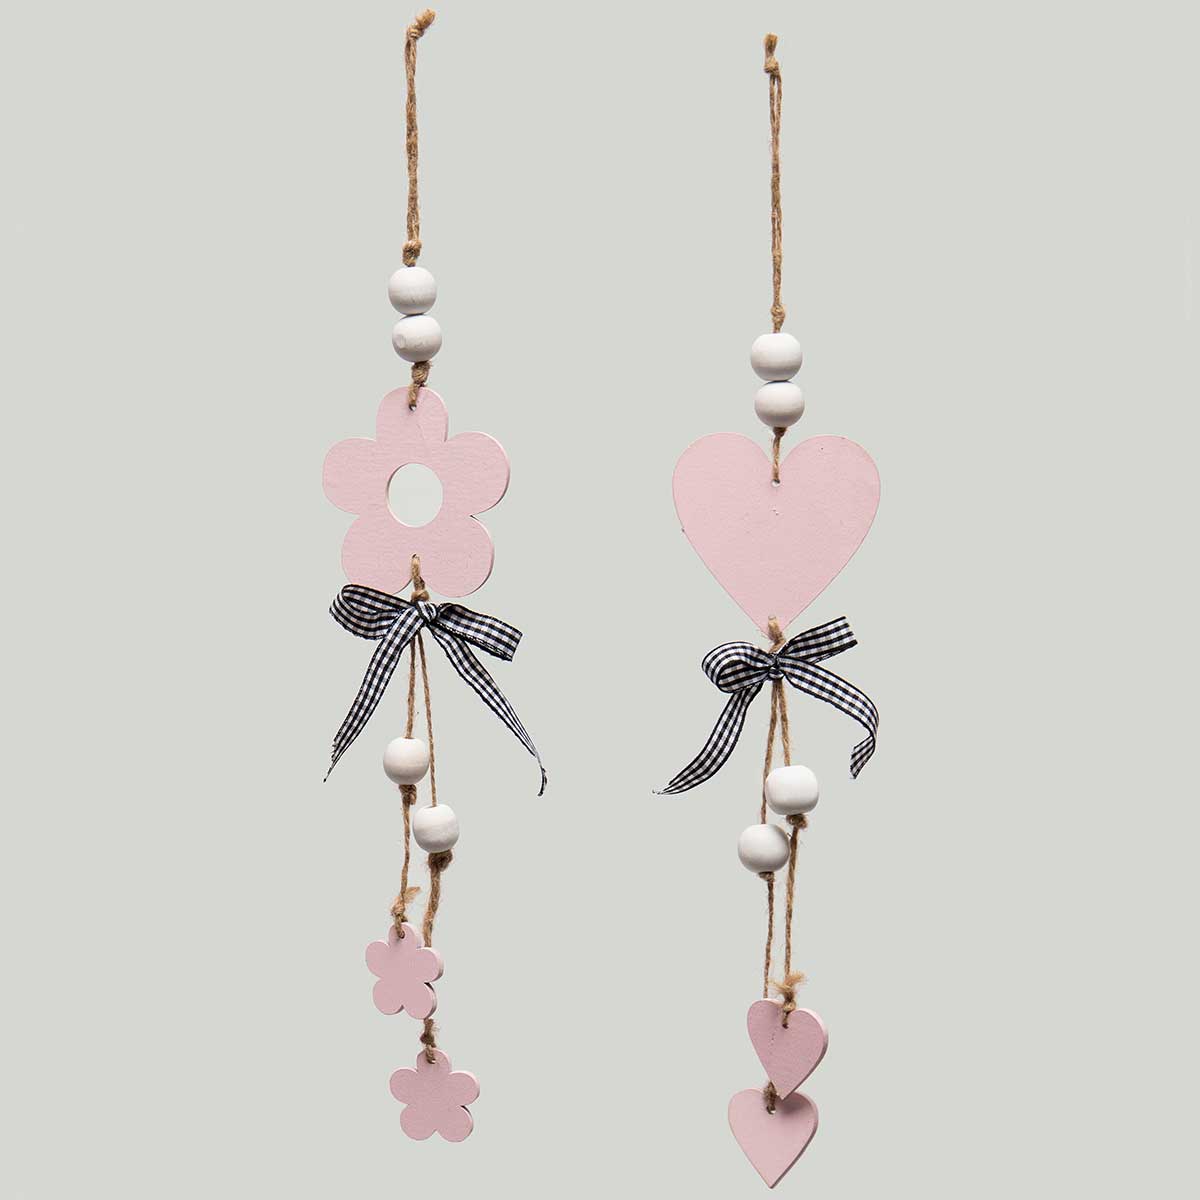 b50 HEART AND FLOWERS WOODEN HANG-UPS PINK/WHITE WITH TWINE